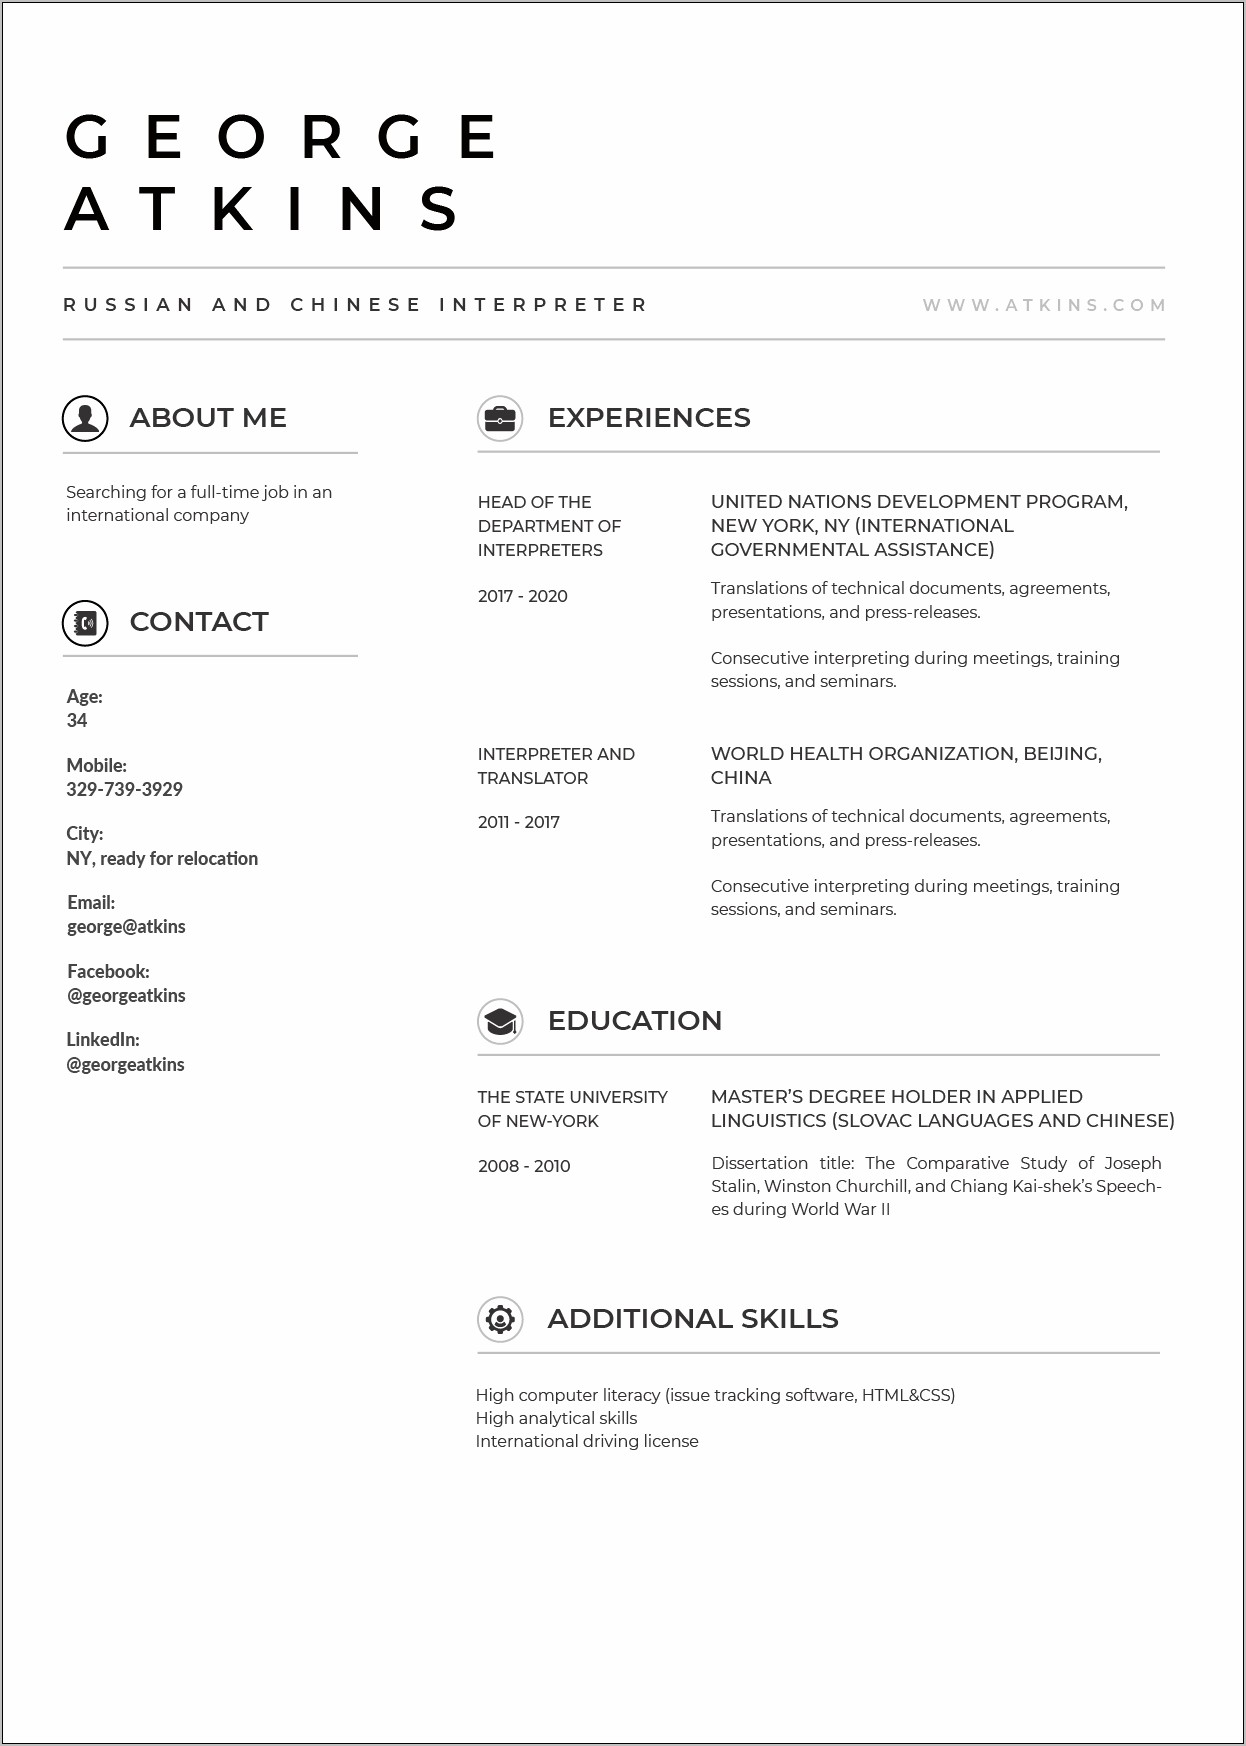 Help Me Write My Resume For Free